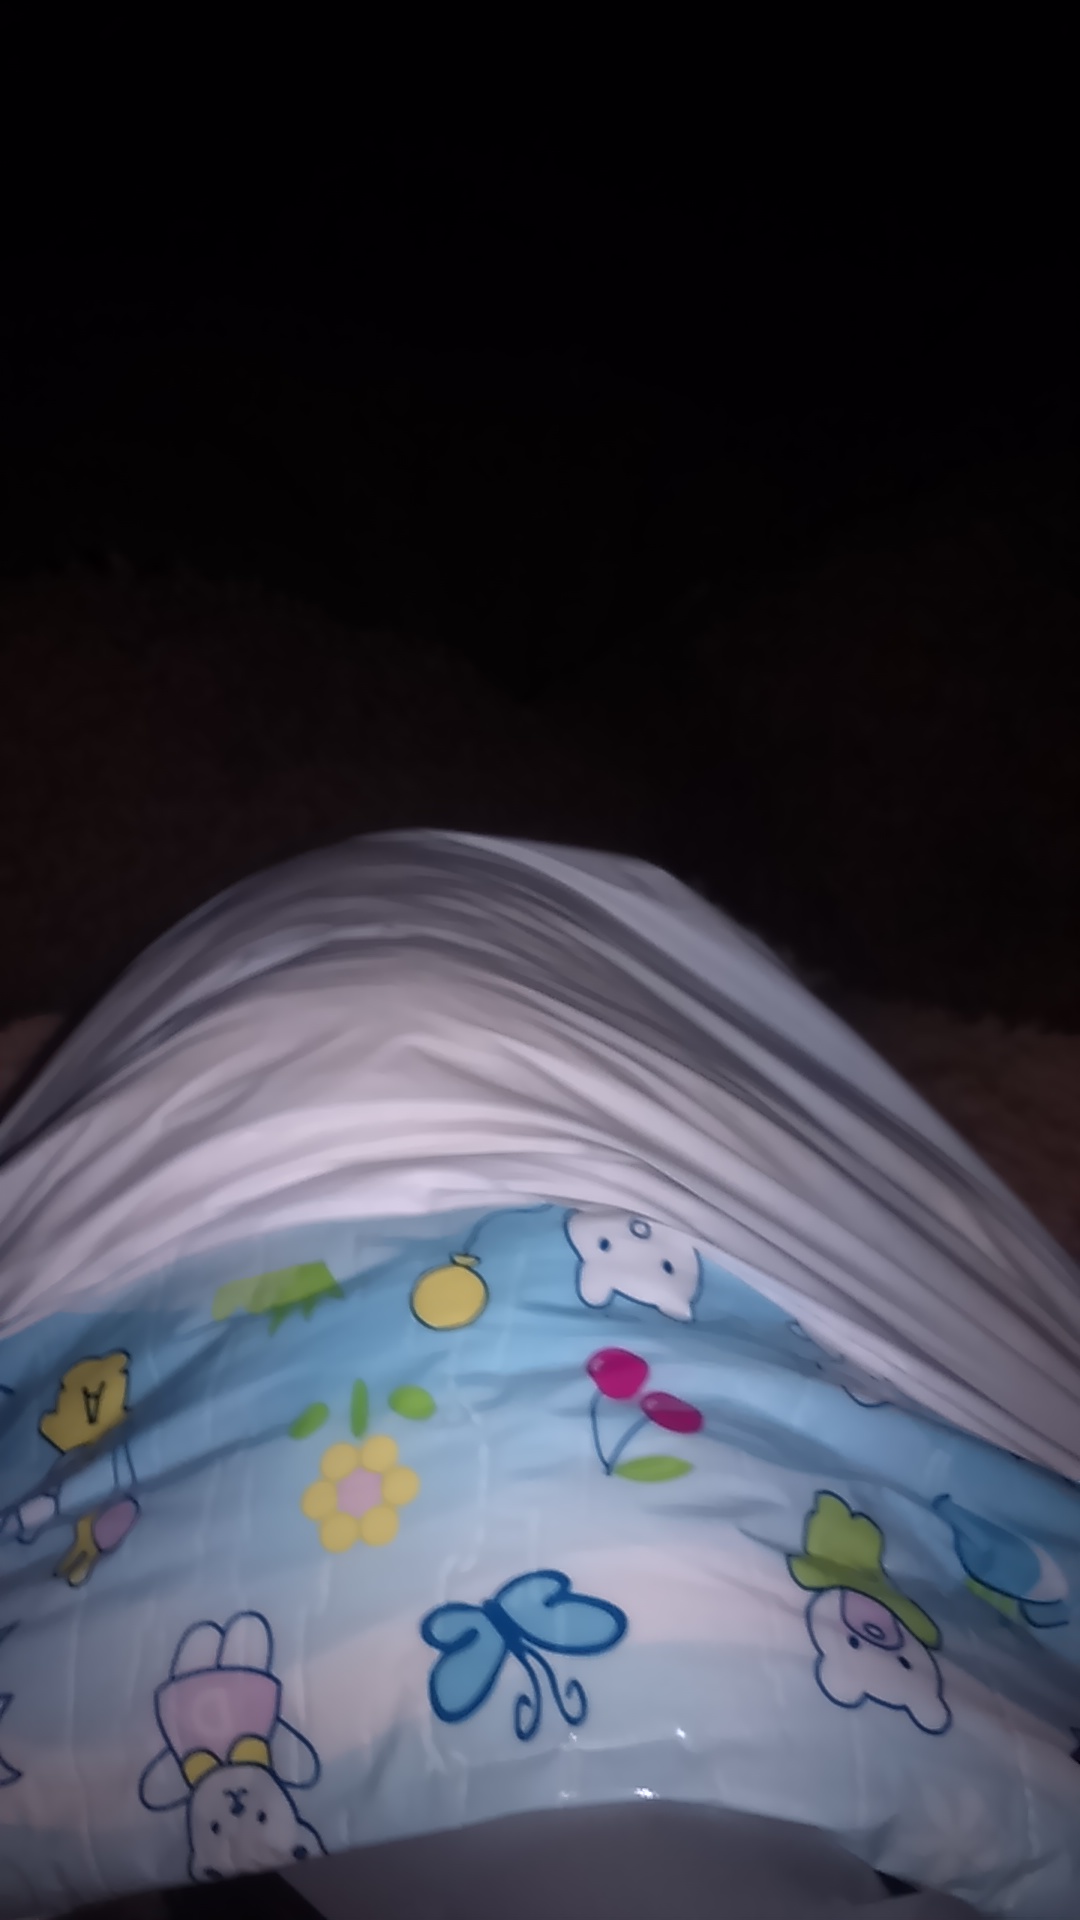 Diapers in bed